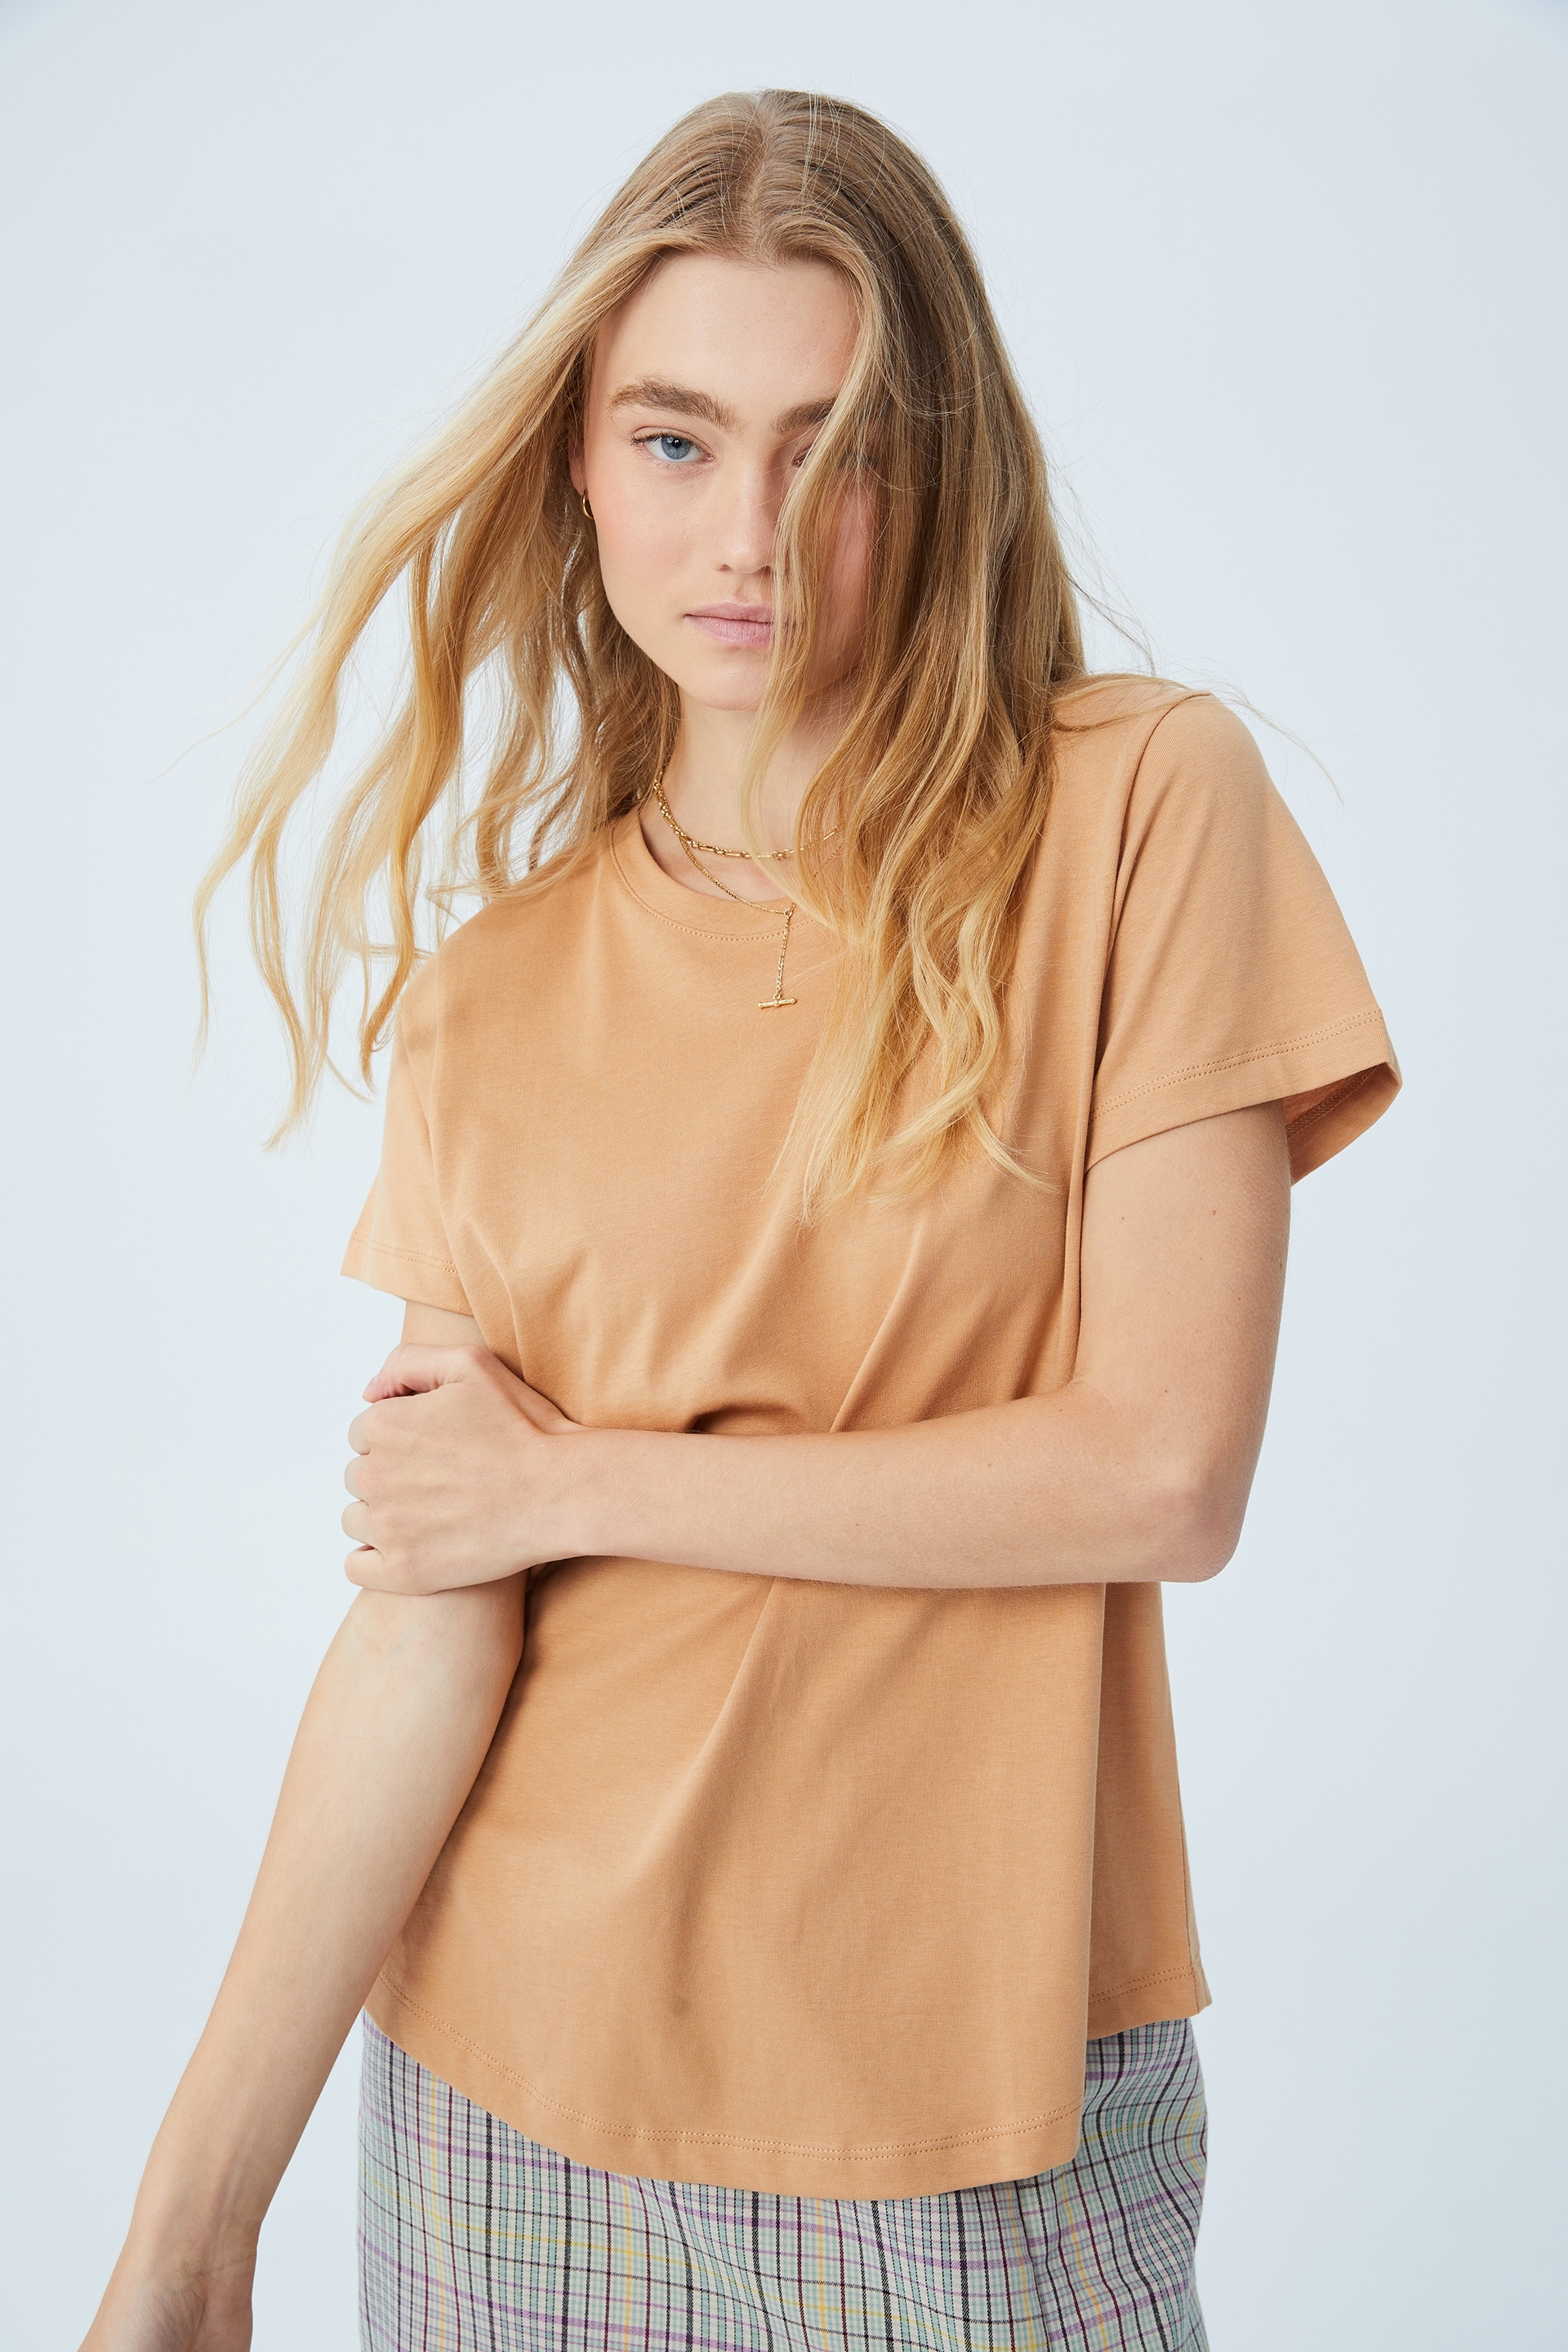 Cotton On Women - The One Crew Tee - Soft taupe